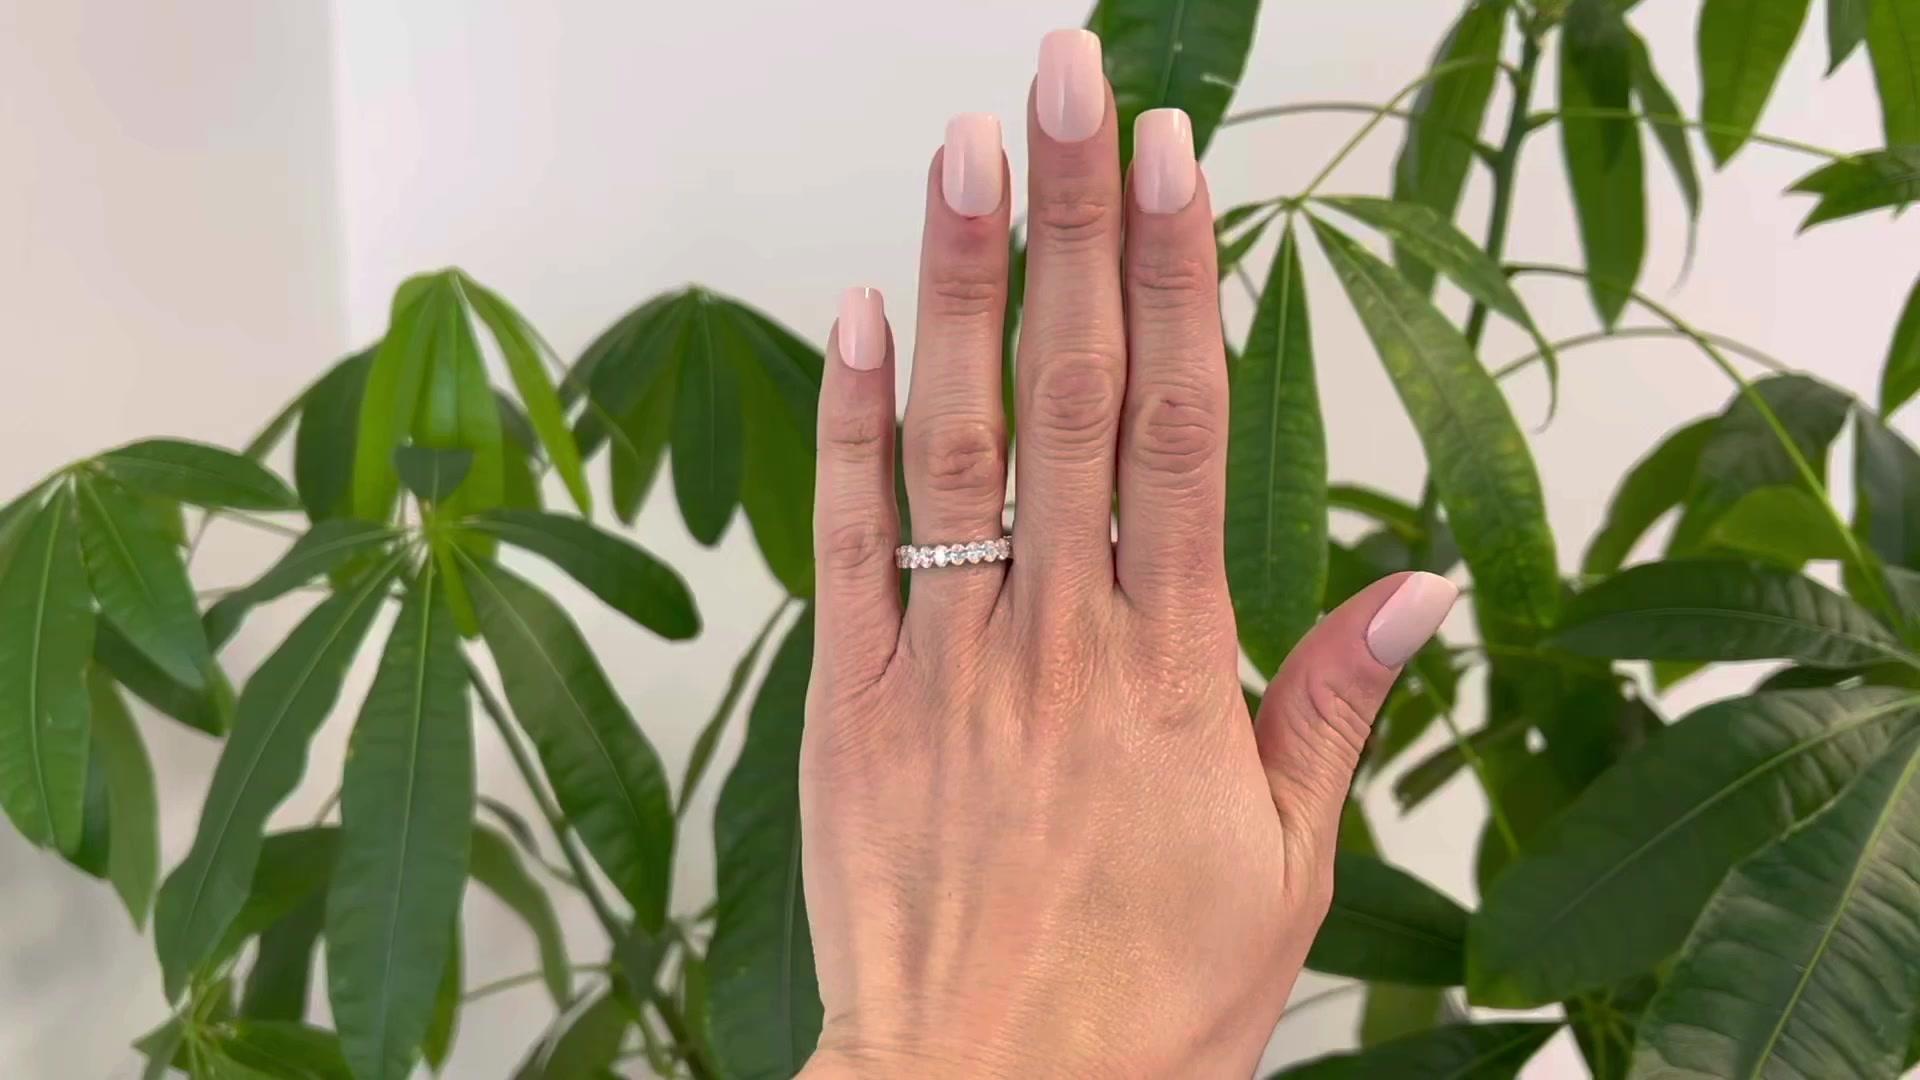 One 2.47 Carats Total Weight 14k White Gold Eternity Band. Featuring 23 oval brilliant cut diamonds with a total weight of 2.47 carats, graded F color, VS clarity. Crafted in 14 karat white gold. Circa 2020. The ring is a size 6 1/2.

About this